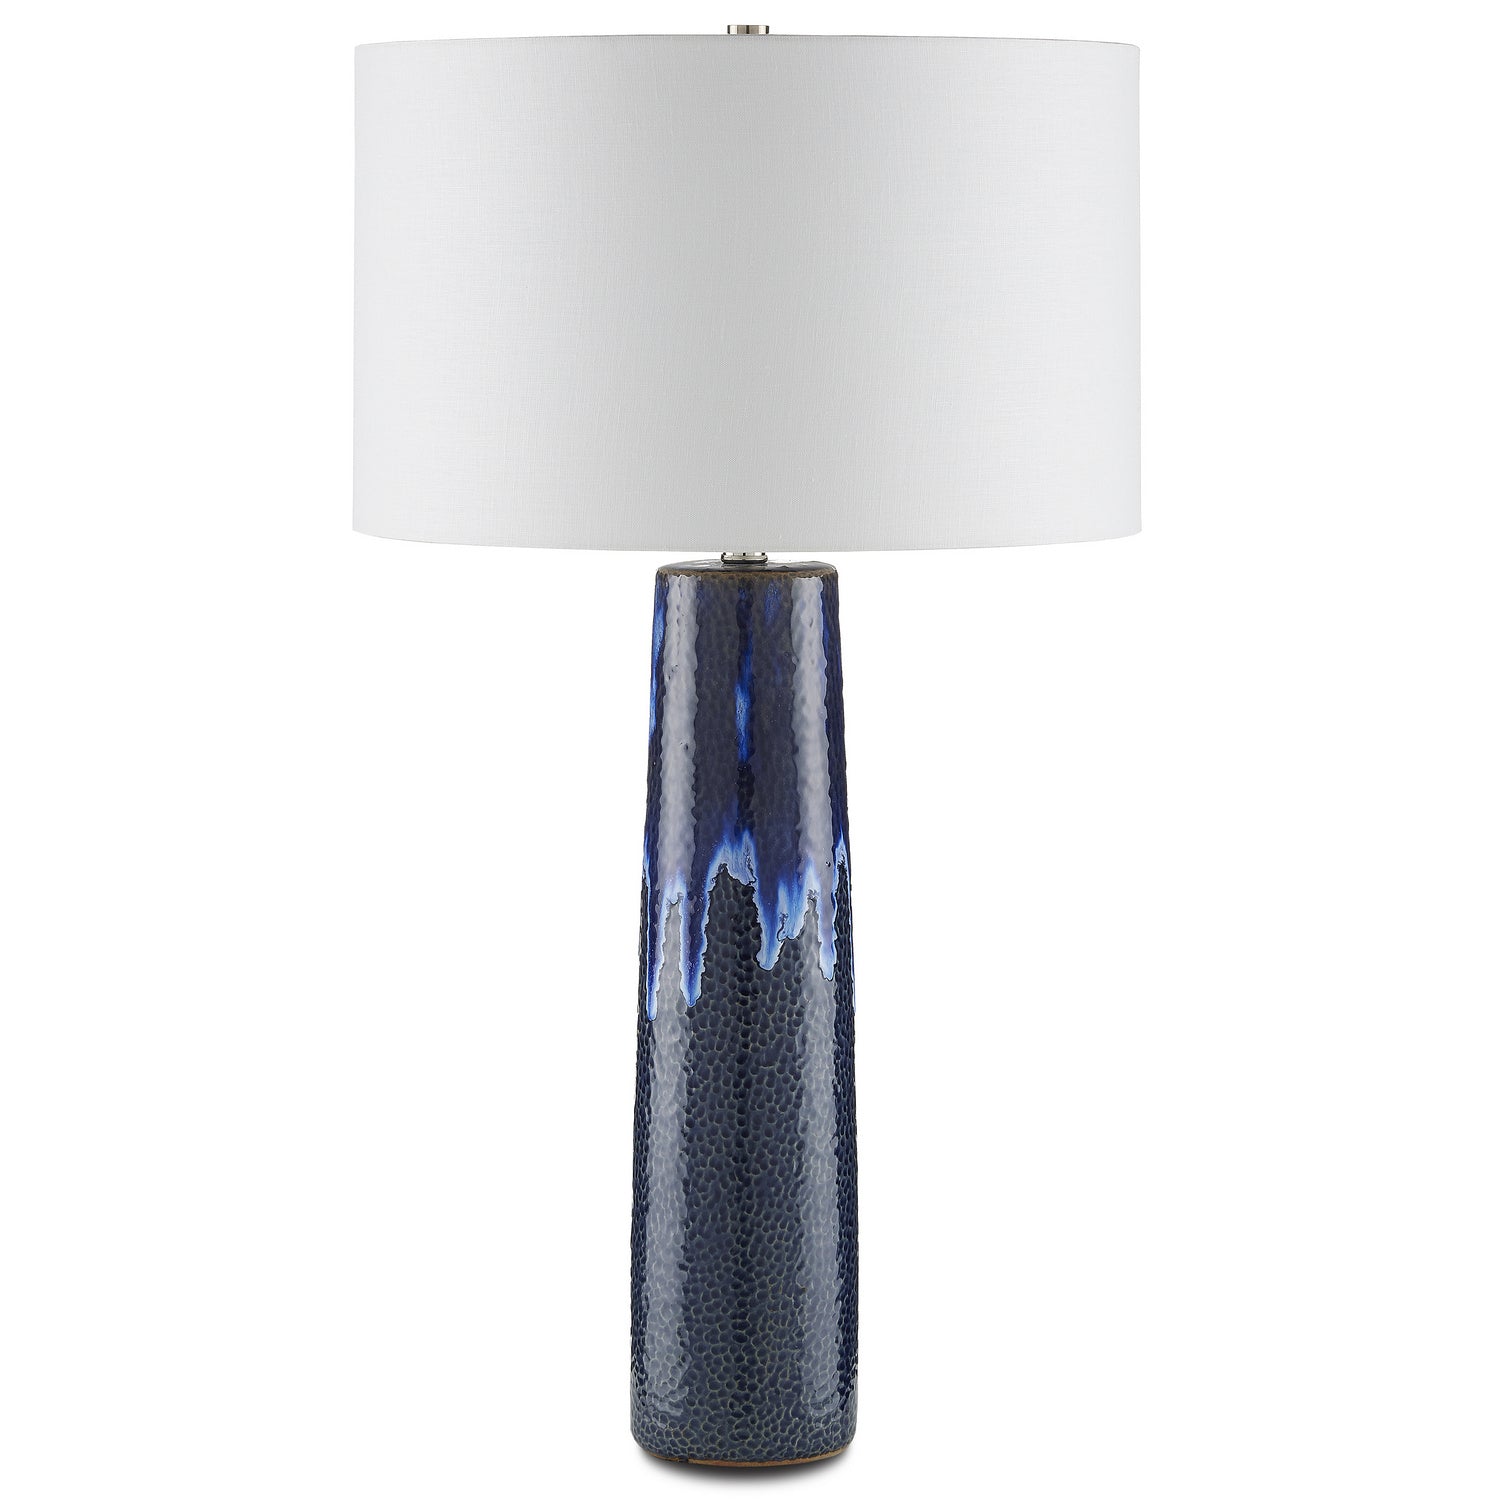 One Light Table Lamp from the Kelmscott collection in Reactive Blue finish